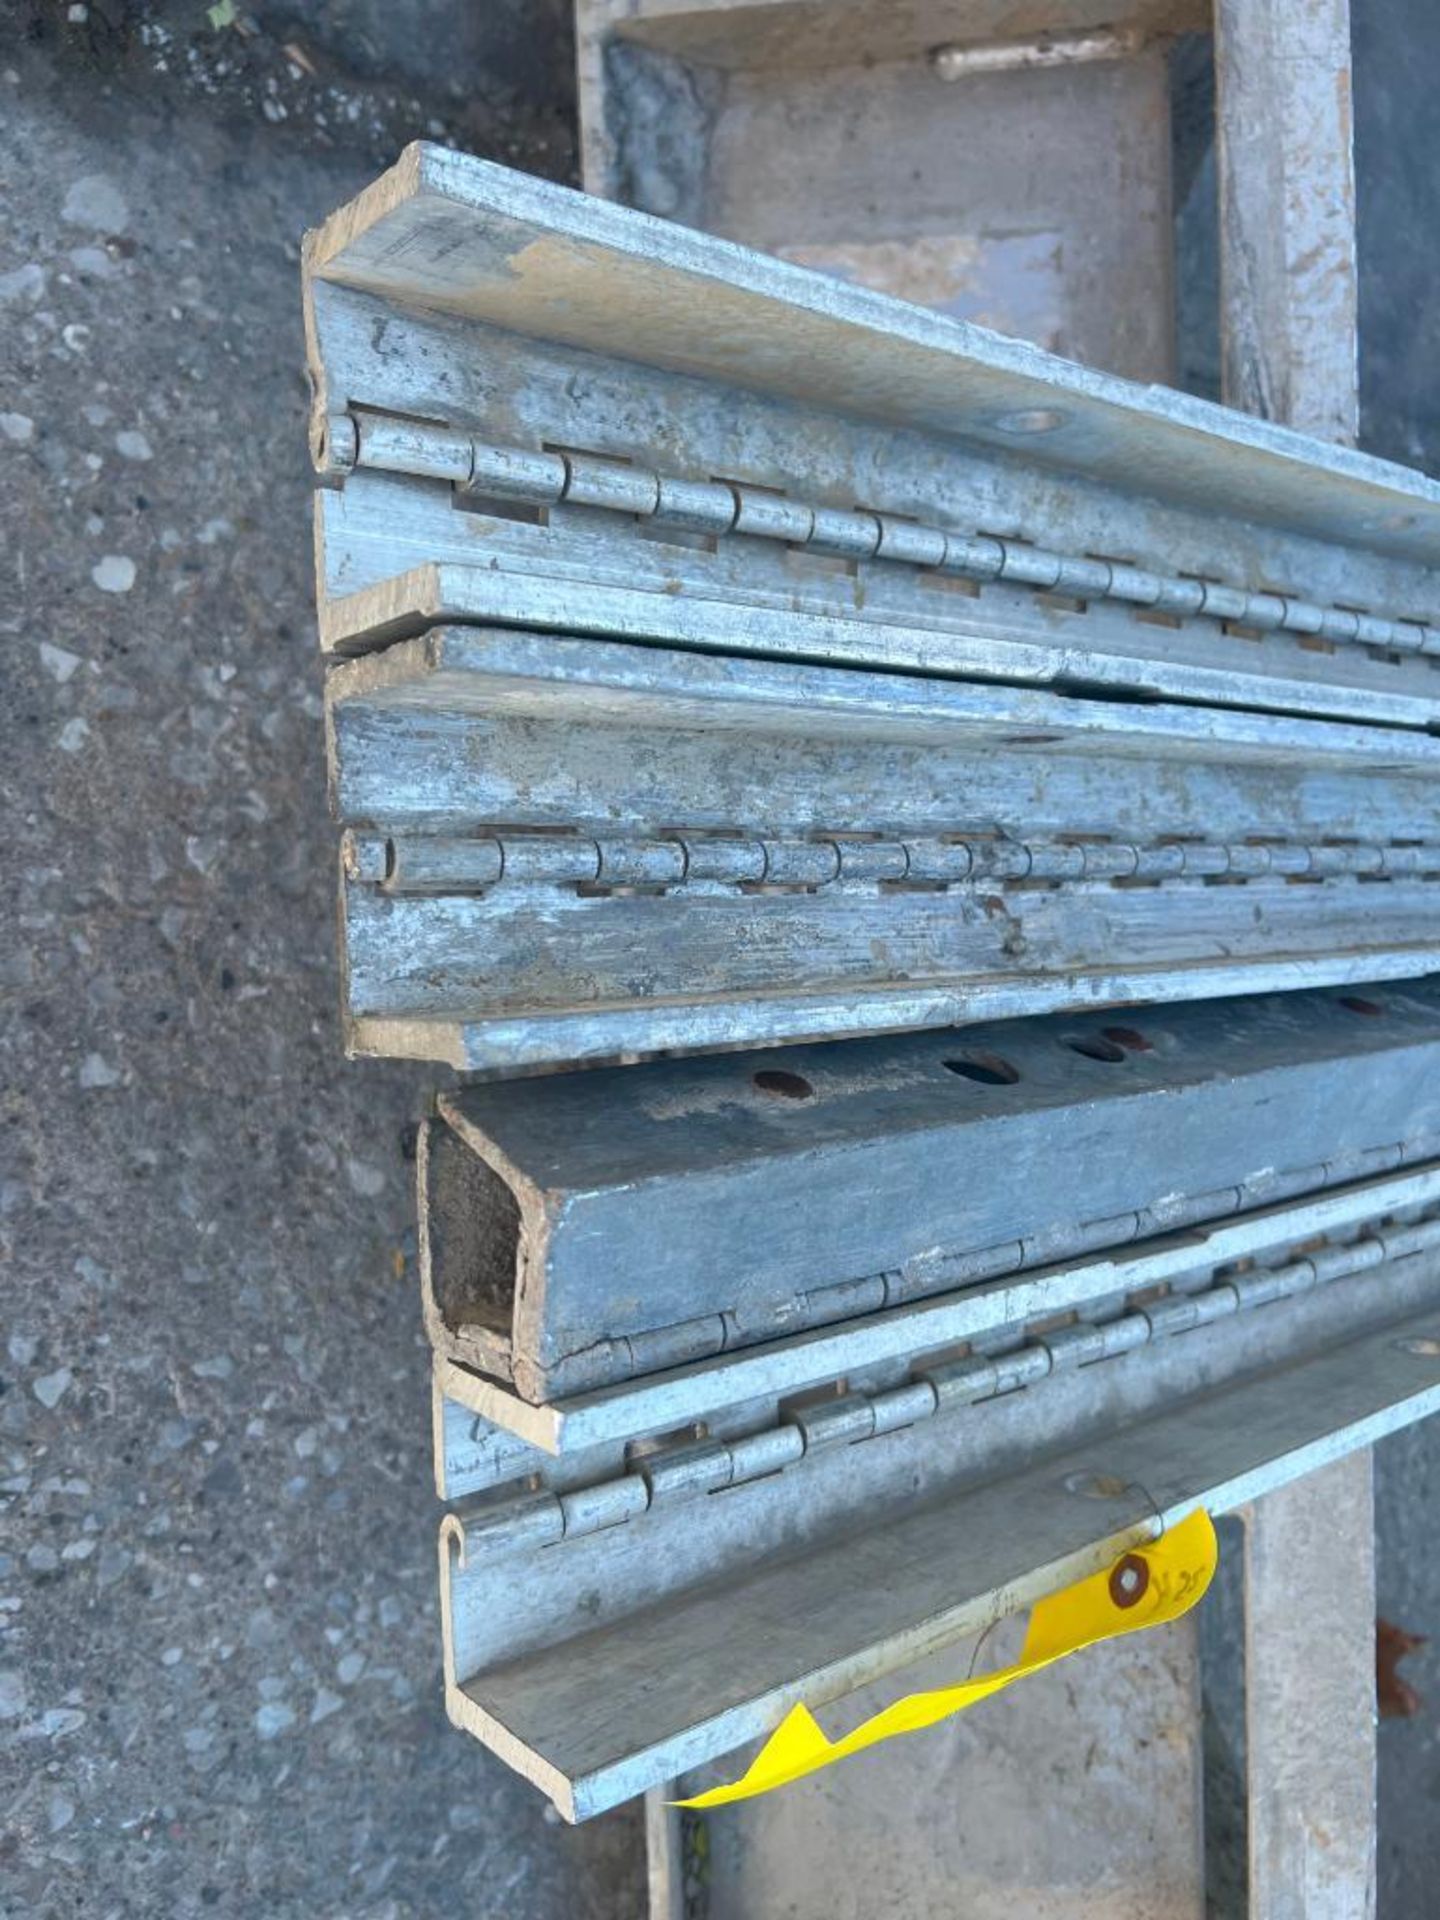 0(4) 1 1/2" x 8' Hinged Wall Ties Smooth Aluminum Concrete Forms, 8" Hole Pattern. Located in Mt. Pl - Image 2 of 2